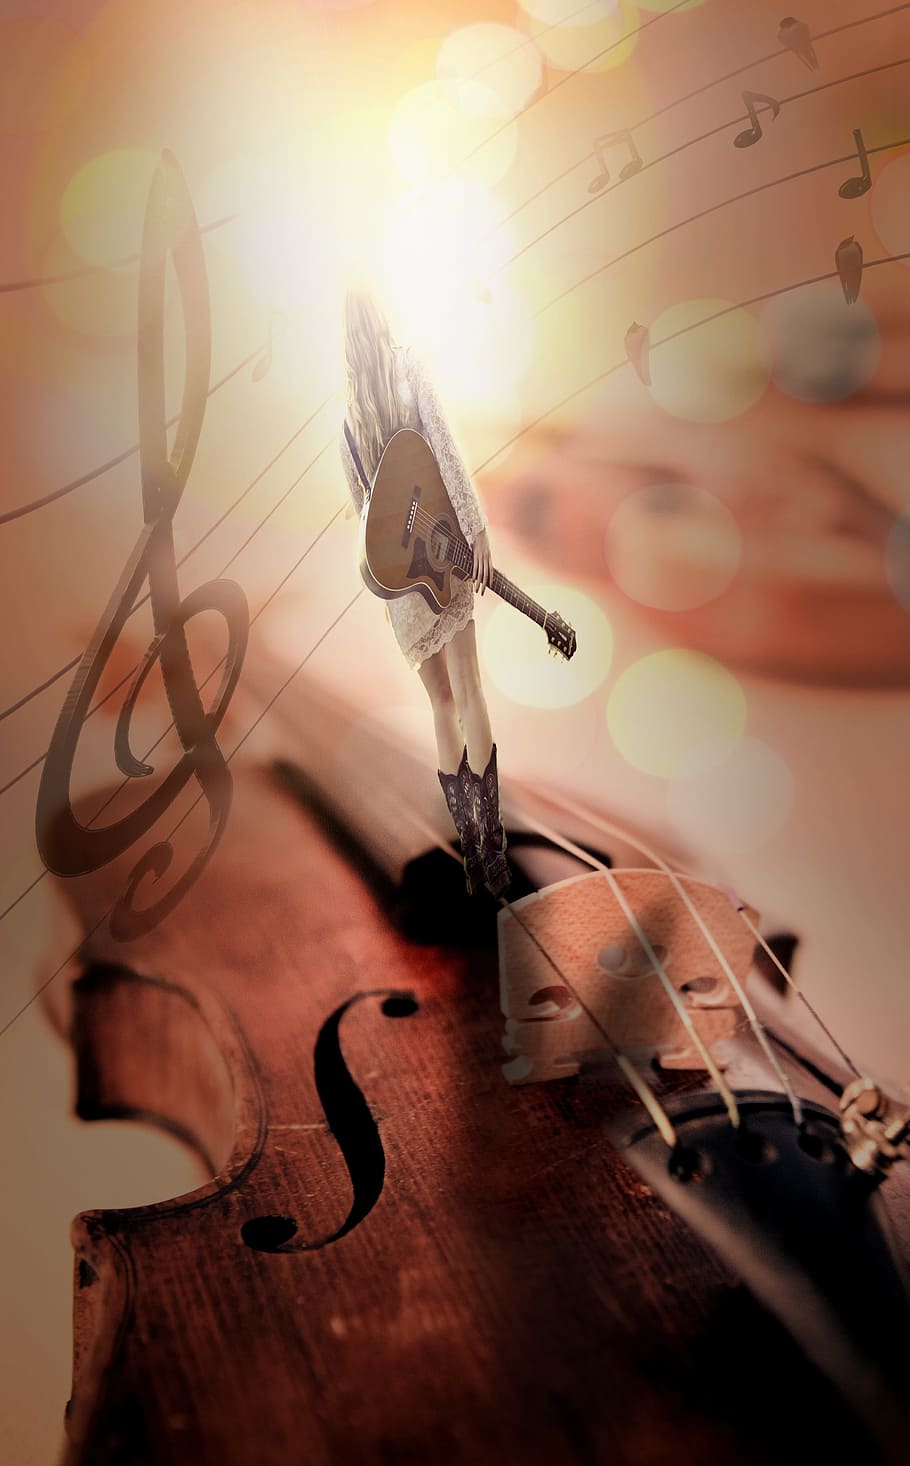 music-themed digital wallpaper, music, guitar, violin, strings, stringed instrument, musician, play guitar, musical instrument, photo montage